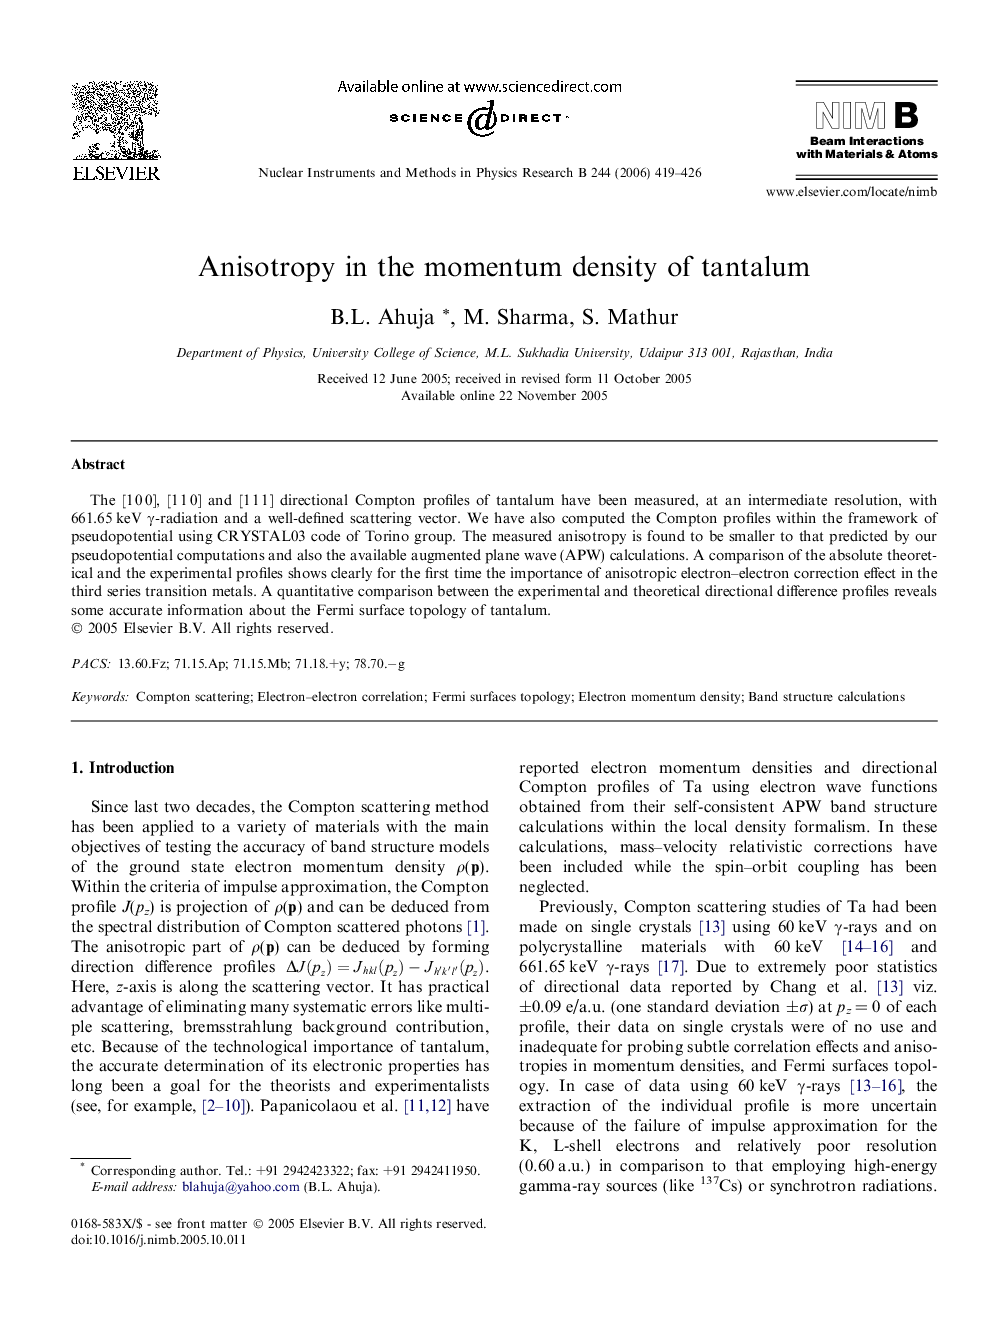 Anisotropy in the momentum density of tantalum